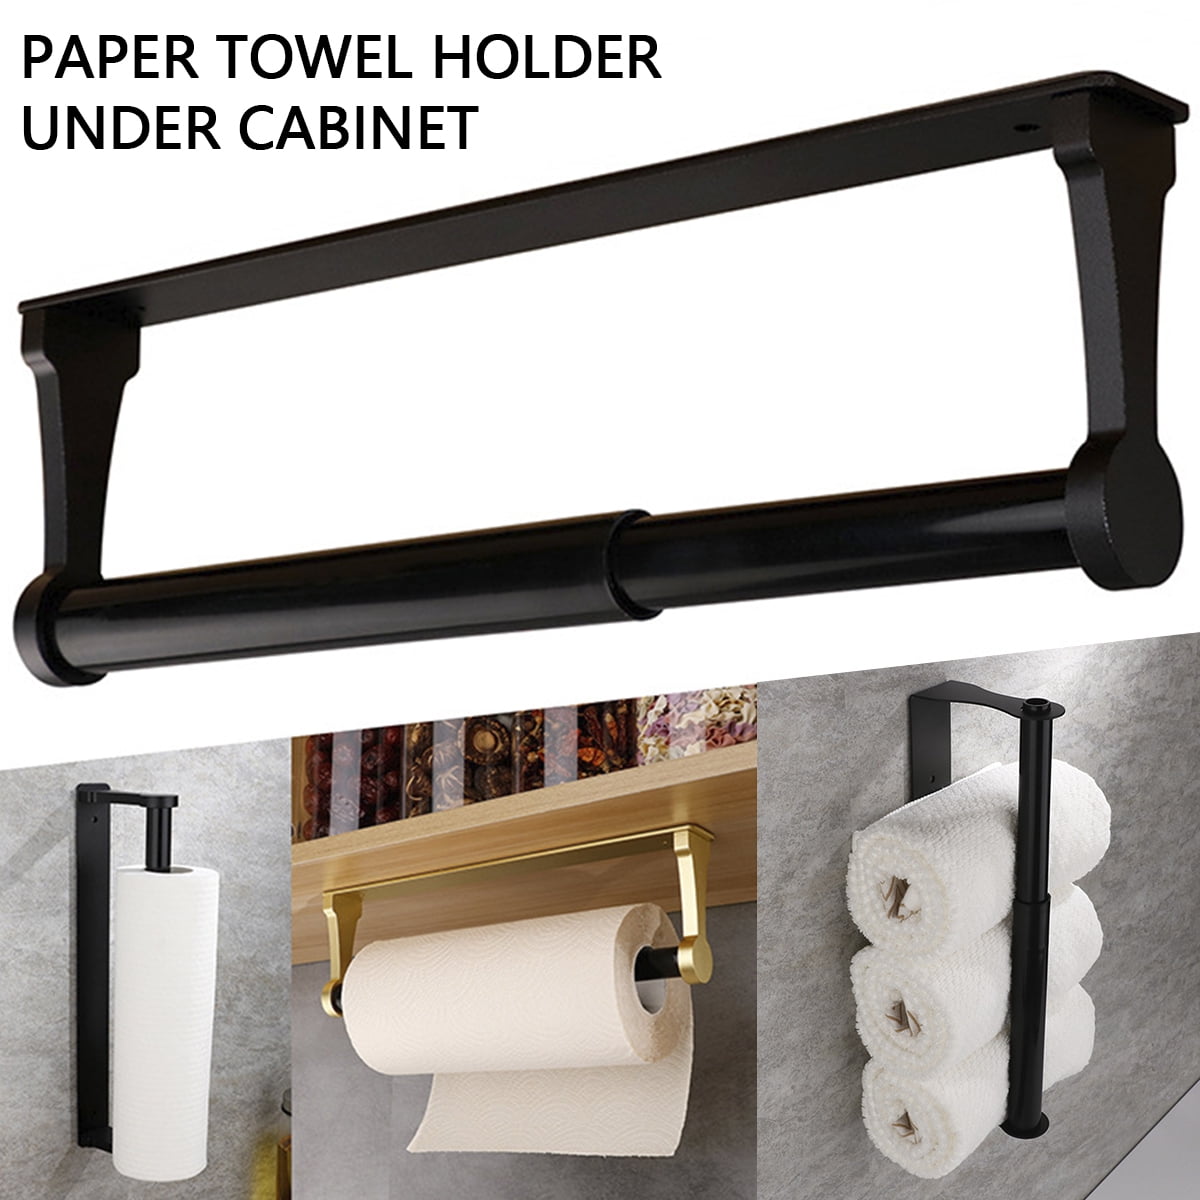 Relax love Paper Roll Hanger Under Cabinet Wall Mount Stainless Steel Heavy  Duty Adhesive or Drilling Paper Towel Rack,Gold 